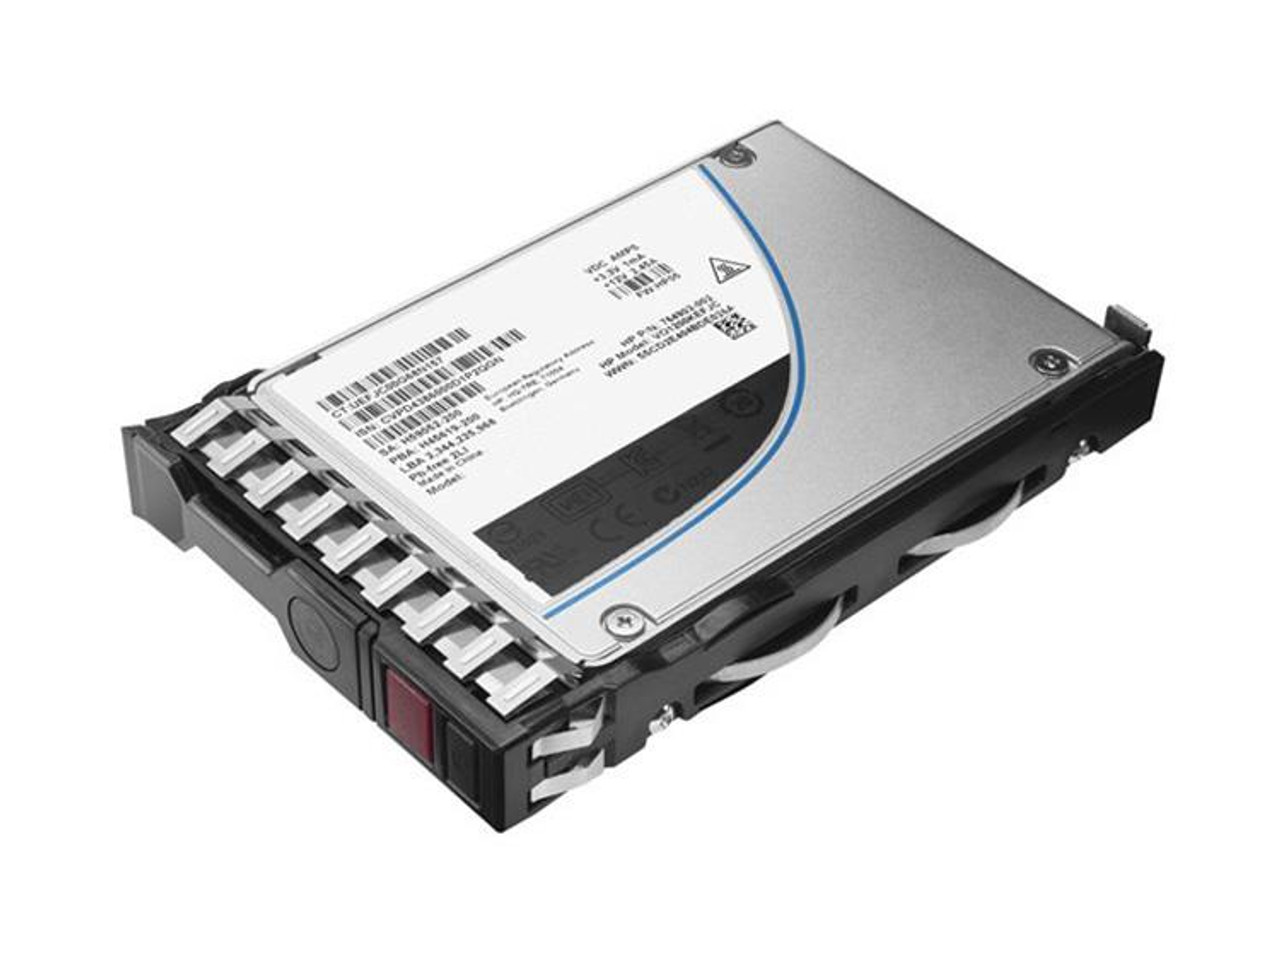 P04476-B21 HPE 960GB TLC SATA 6Gbps Hot Swap Read Intensive 2.5-inch Internal Solid State Drive (SSD) with Smart Carrier